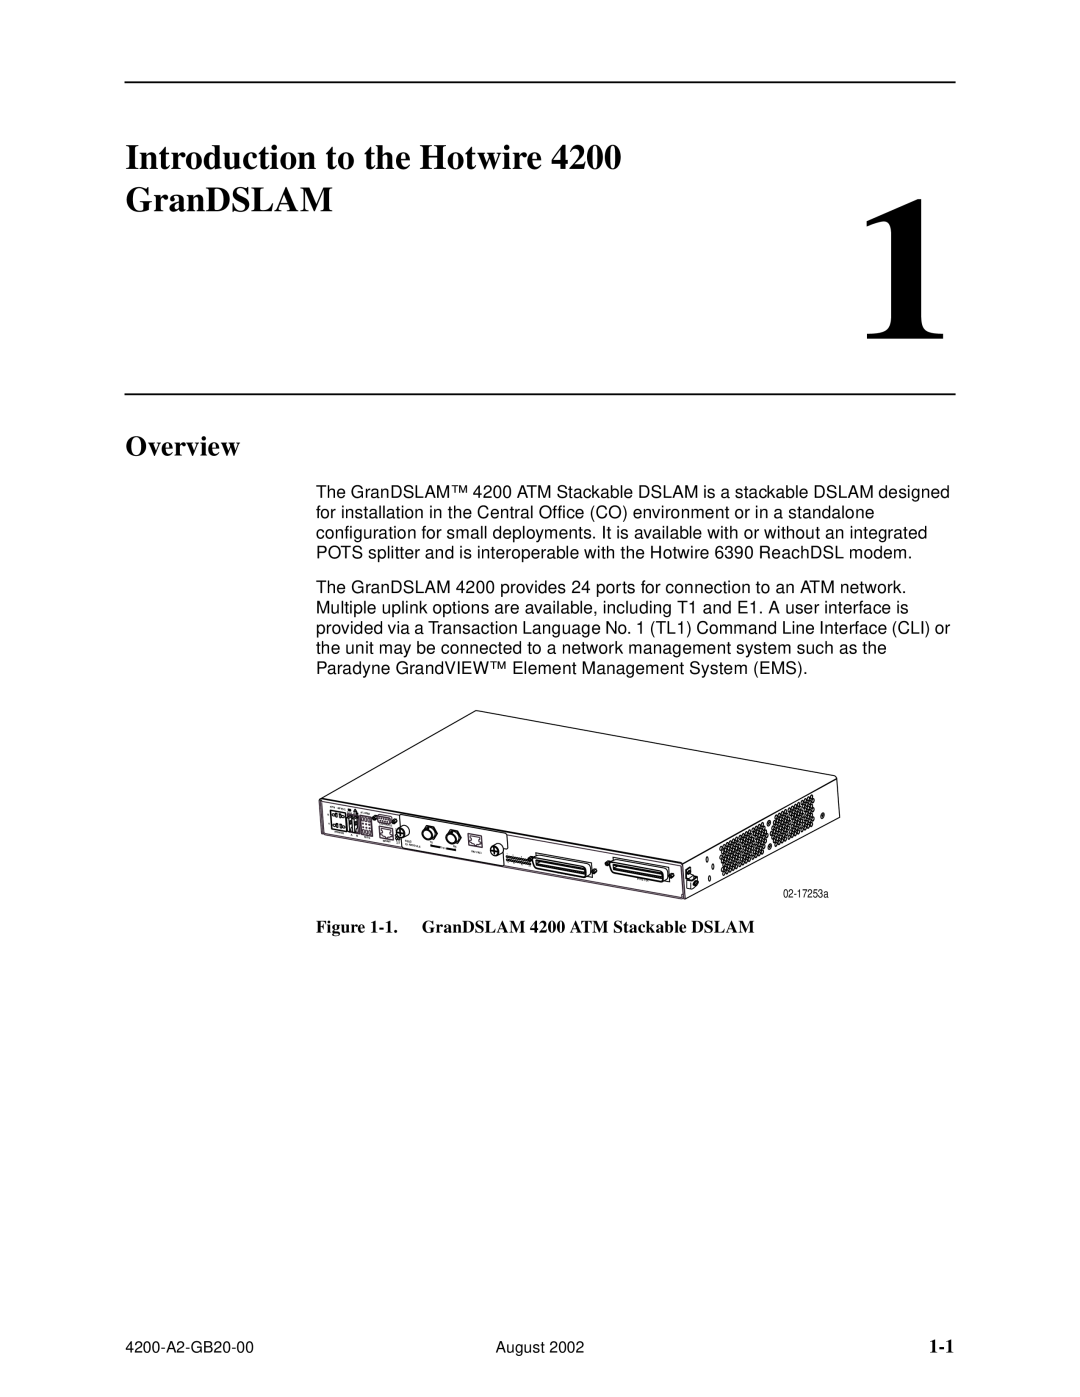 Paradyne manual Introduction to the Hotwire, Overview, 1. GranDSLAM 4200 ATM Stackable DSLAM 